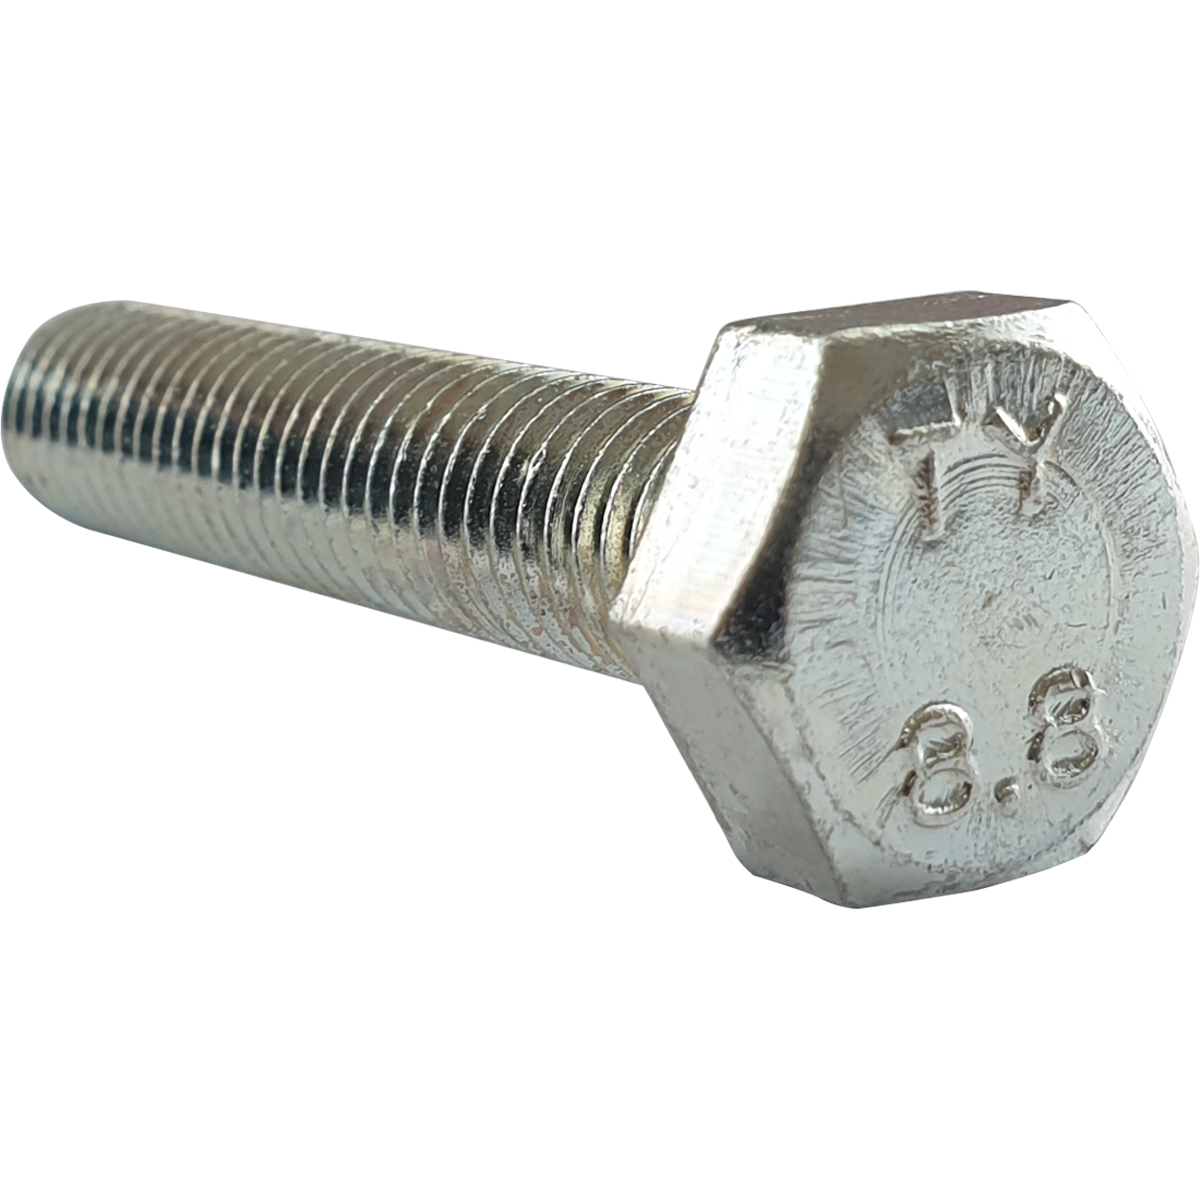 UNC BZP fully threaded hex set screw available in quantities starting from just 1.